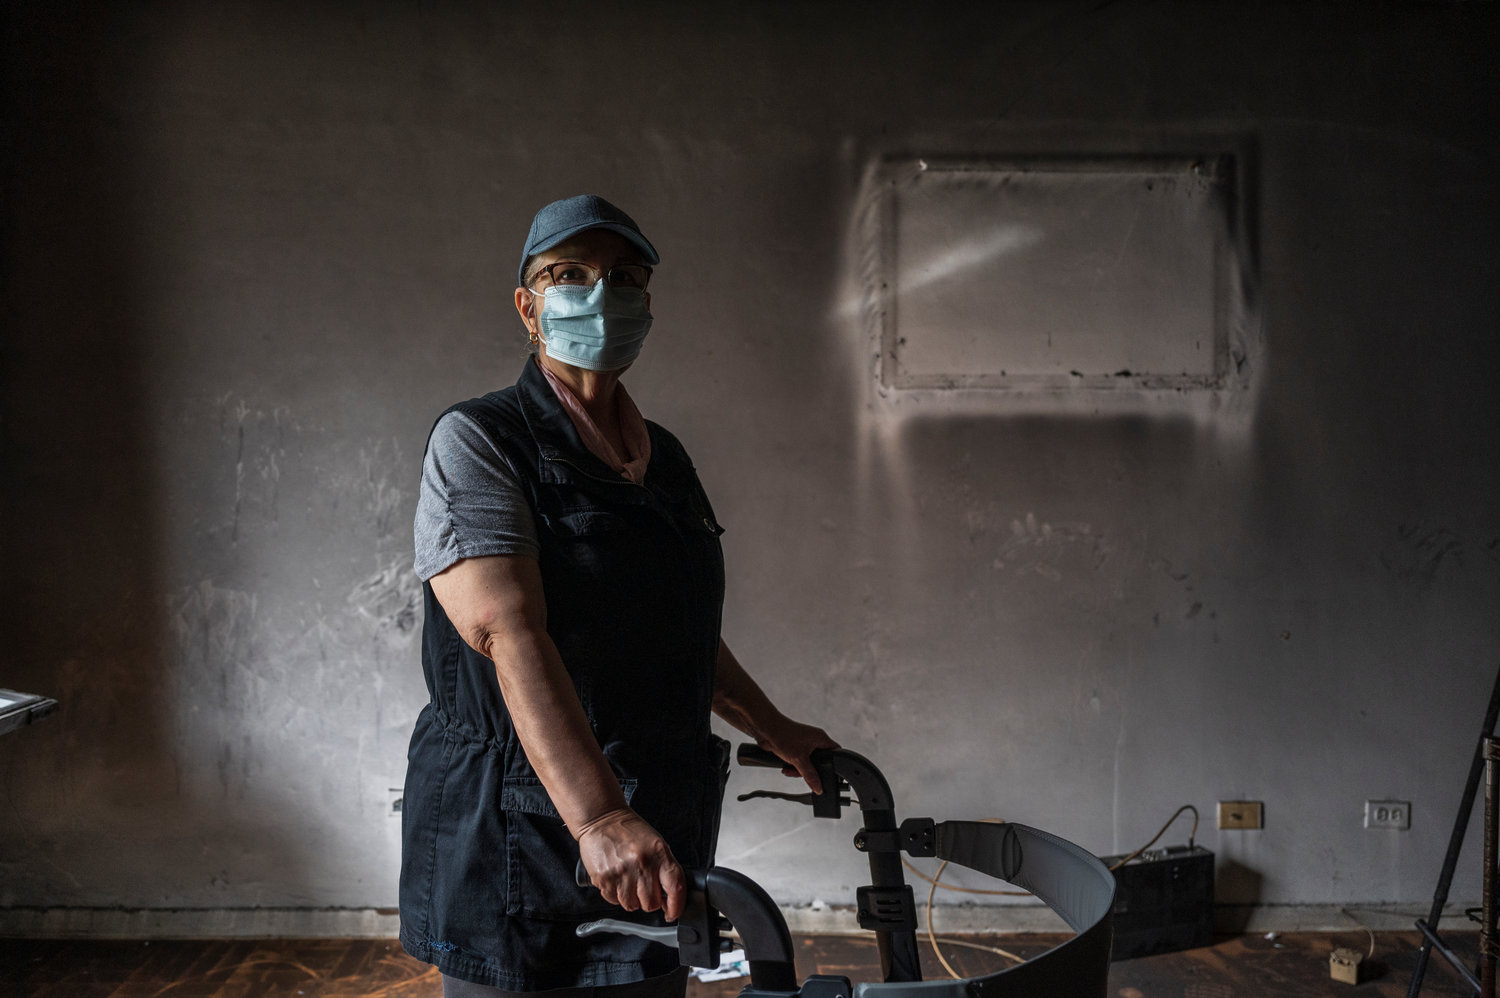 For the first time since fire ripped through her longtime home, Nitza Bravo stands in what was once her living room at her 3215 Arlington Ave., co-op. The January tragedy claimed the life of her ex-husband, Juan Melendez, and she wants nothing more than to return home.